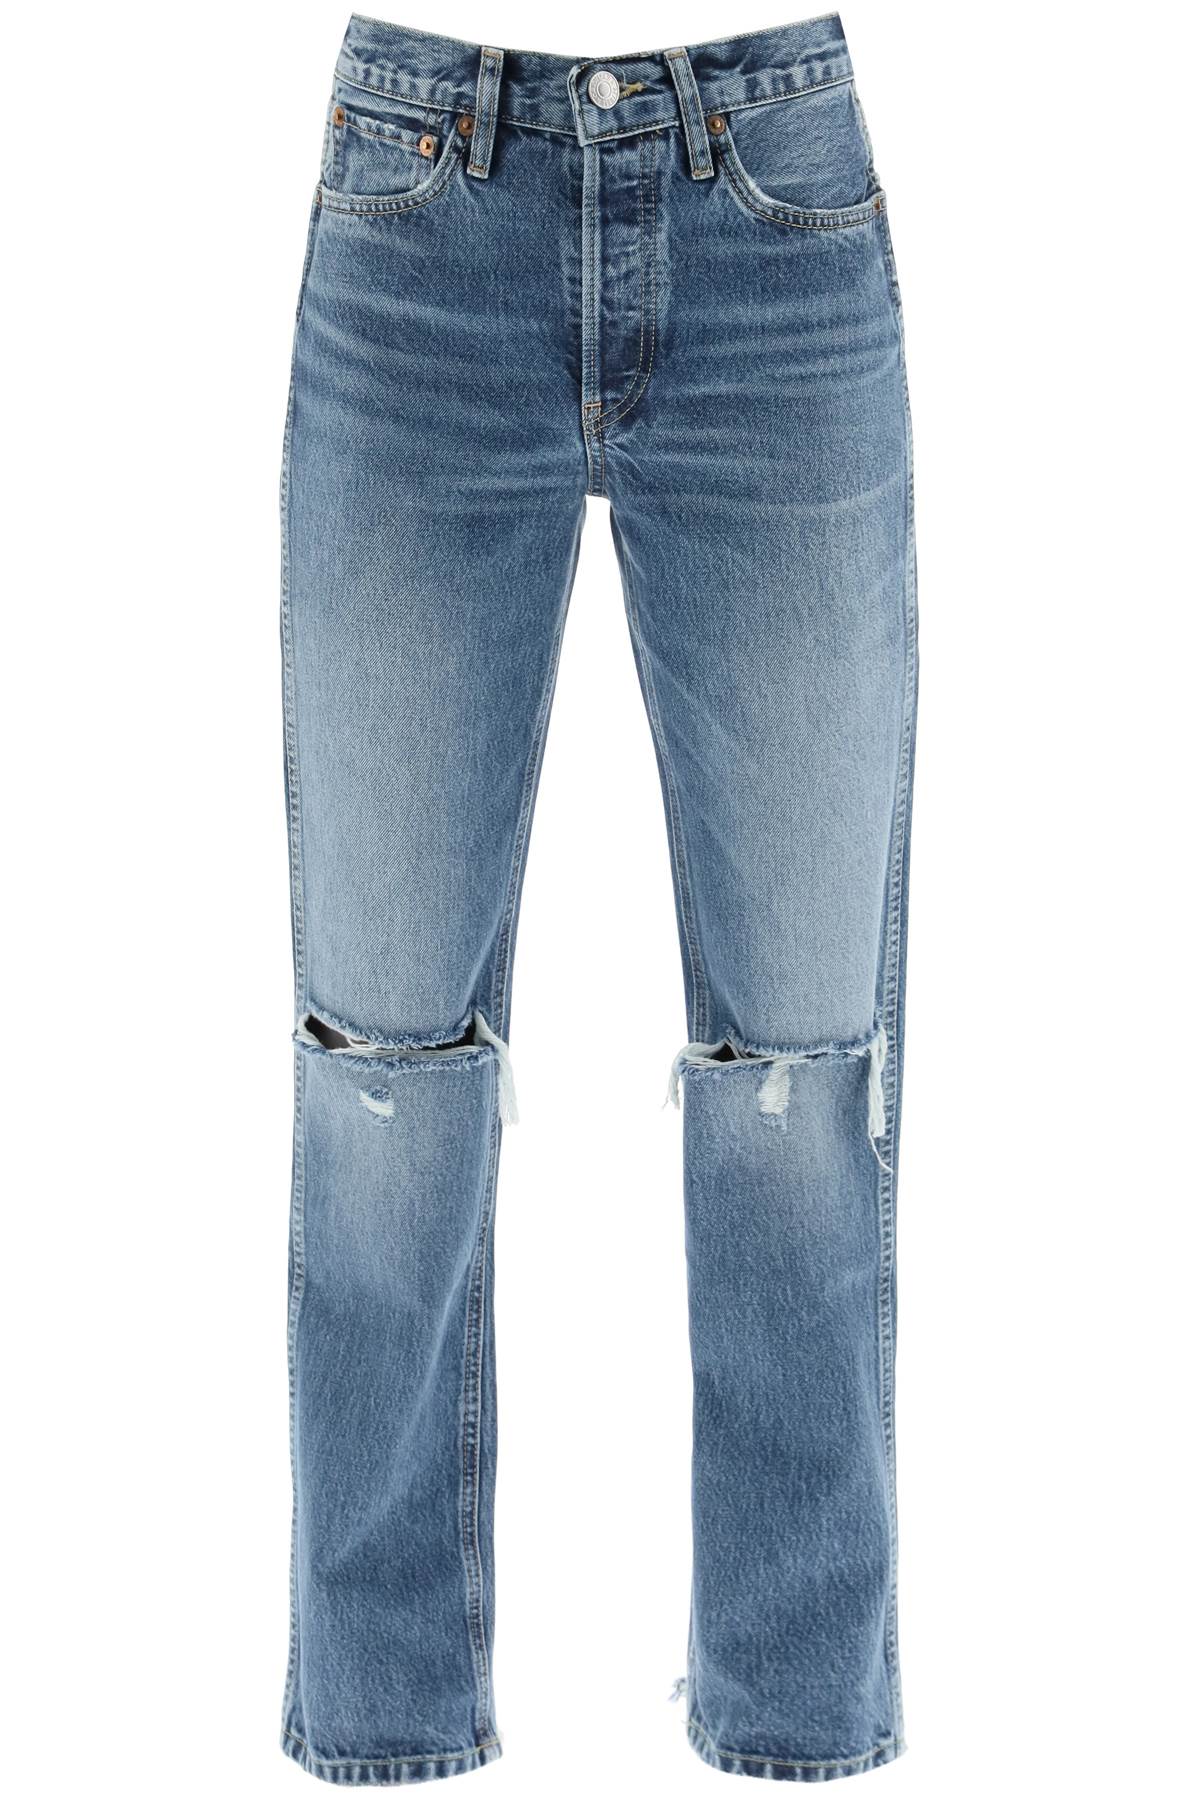 RE/DONE 90S HIGH RISE LOOSE DESTROYED DENIM